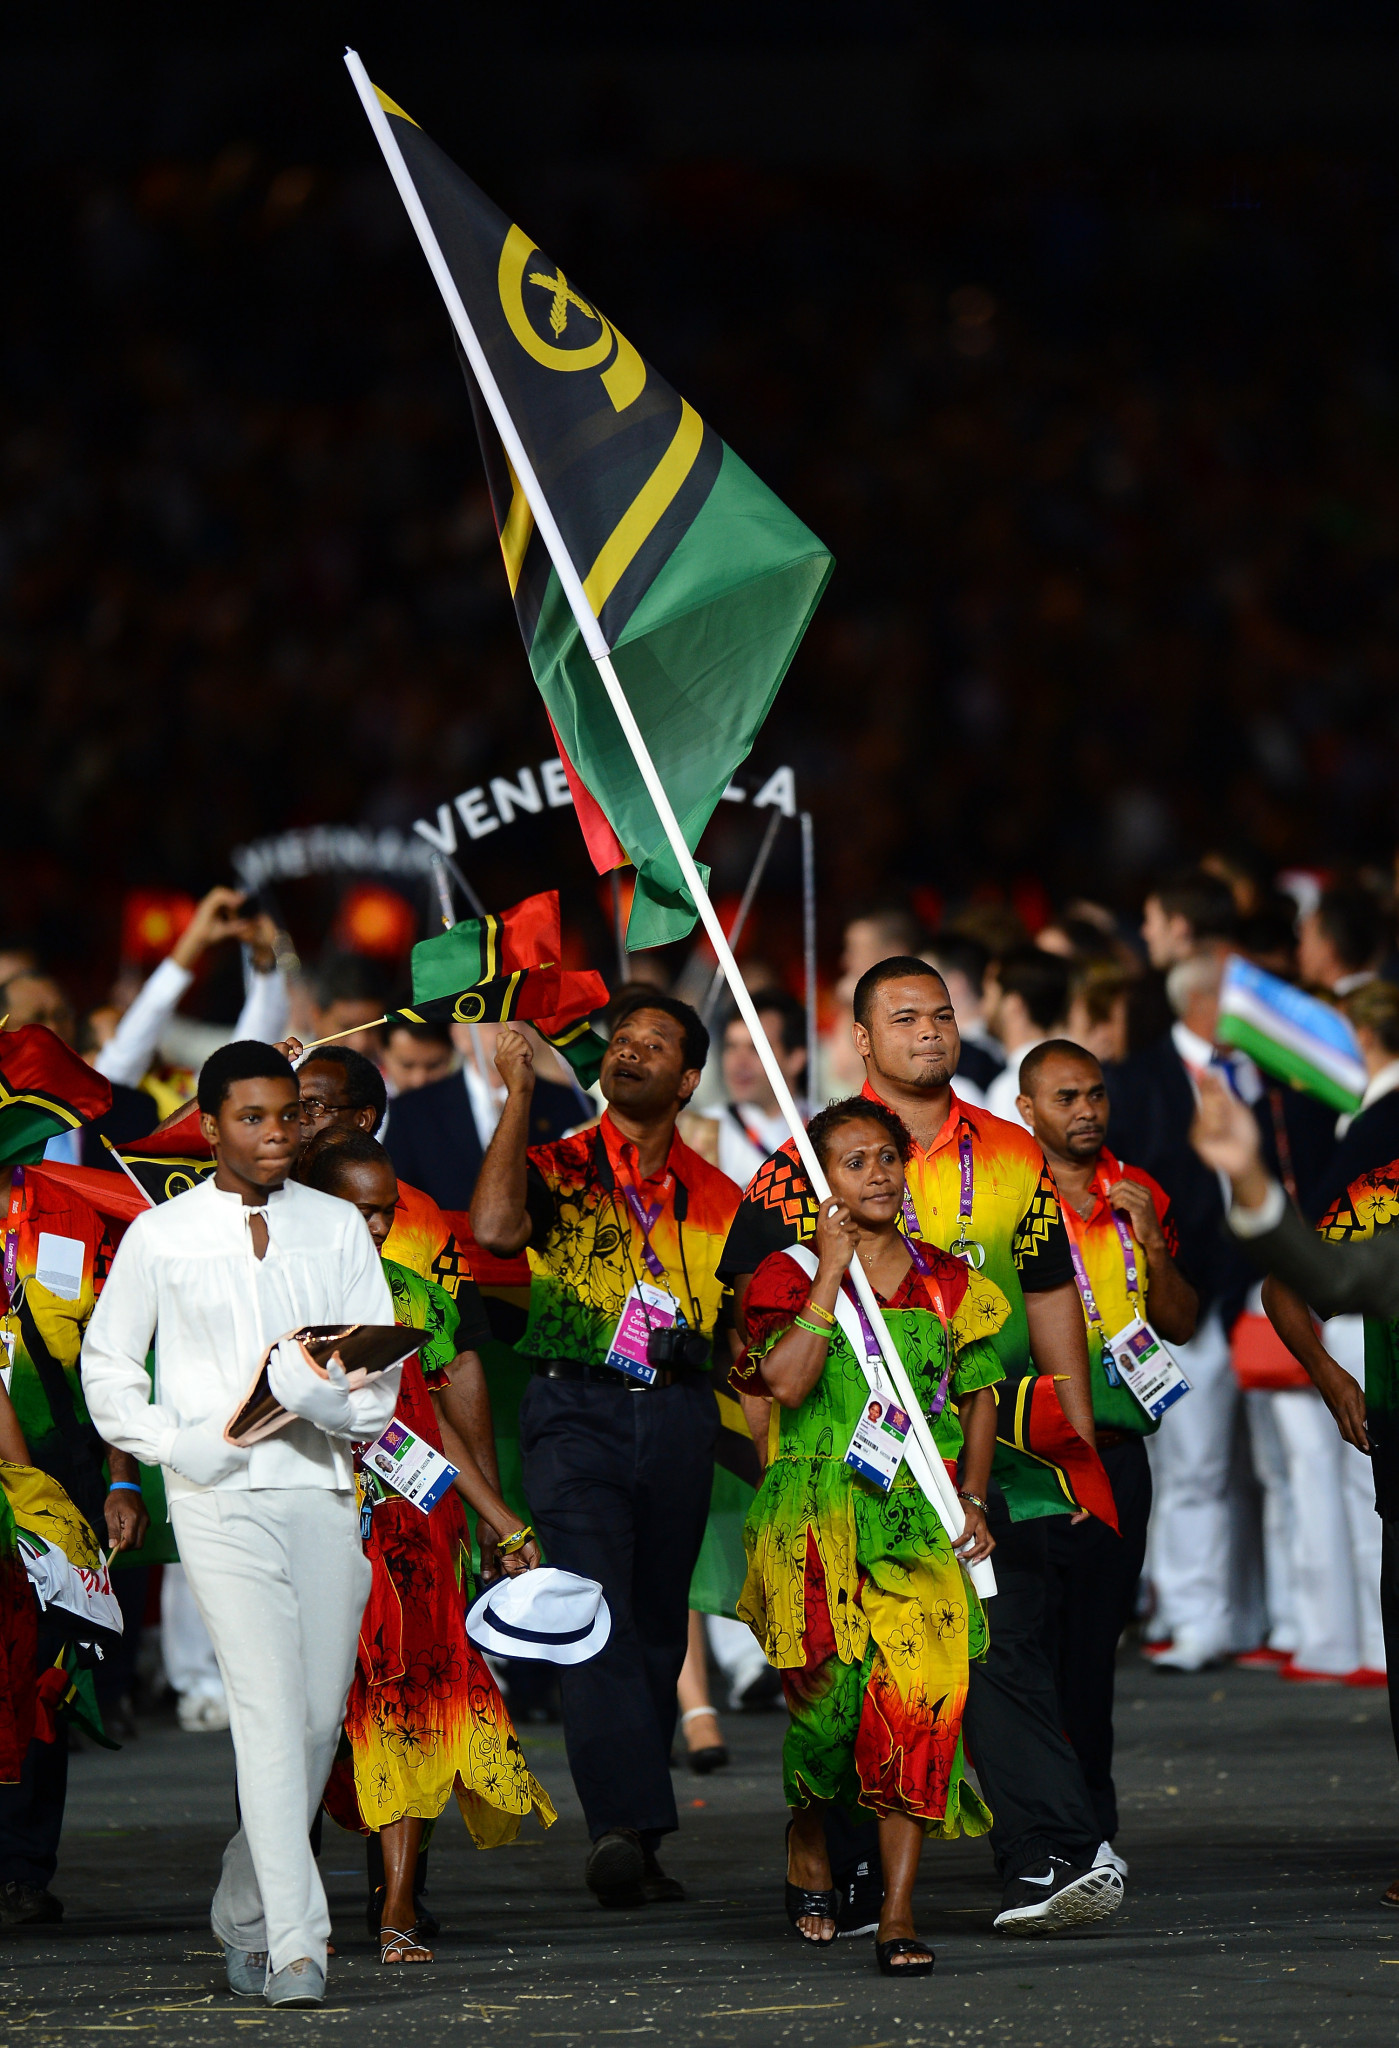 Anolyn Lulu carrying the Vanuatu flag at London 2012 ©Getty Images